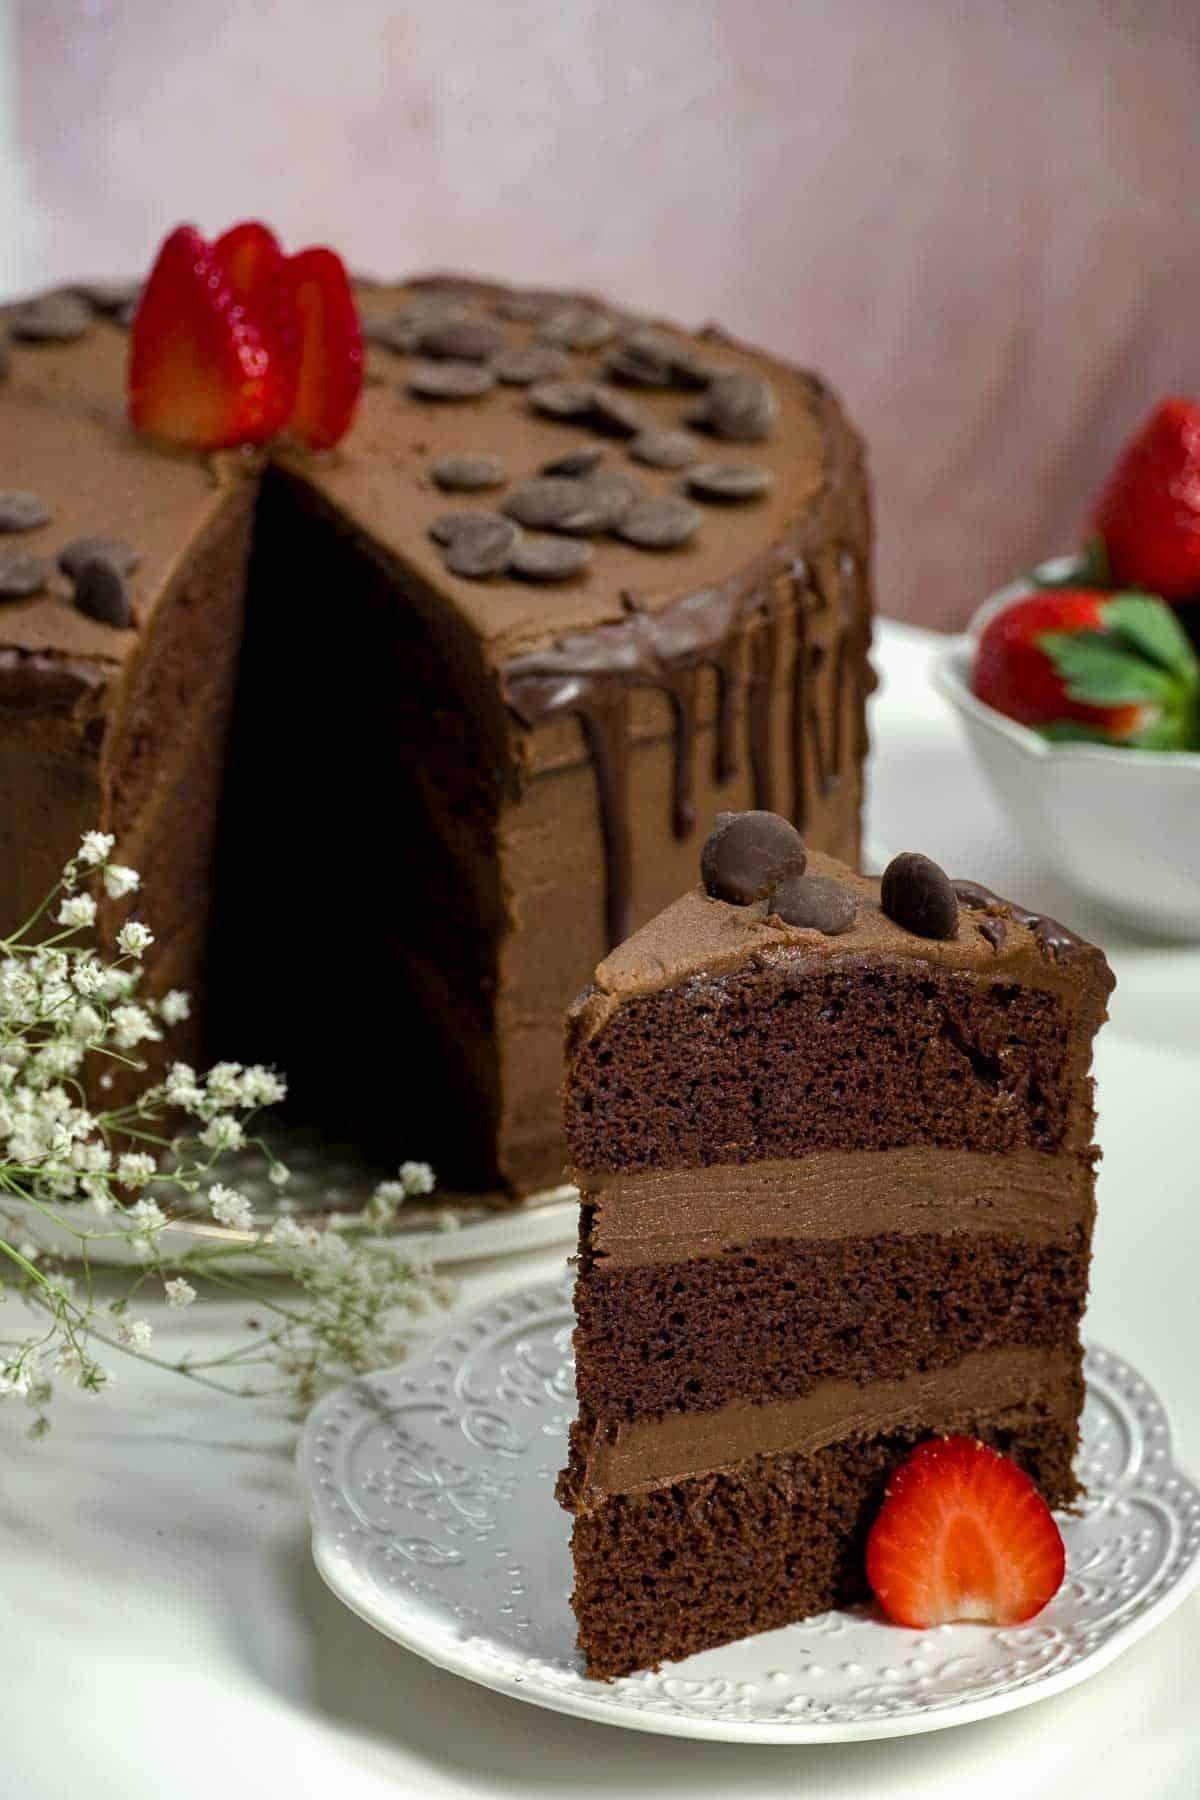 A slice of chocolate cake on plate with a strawberry. The remainder of the cake can be seen in the background.